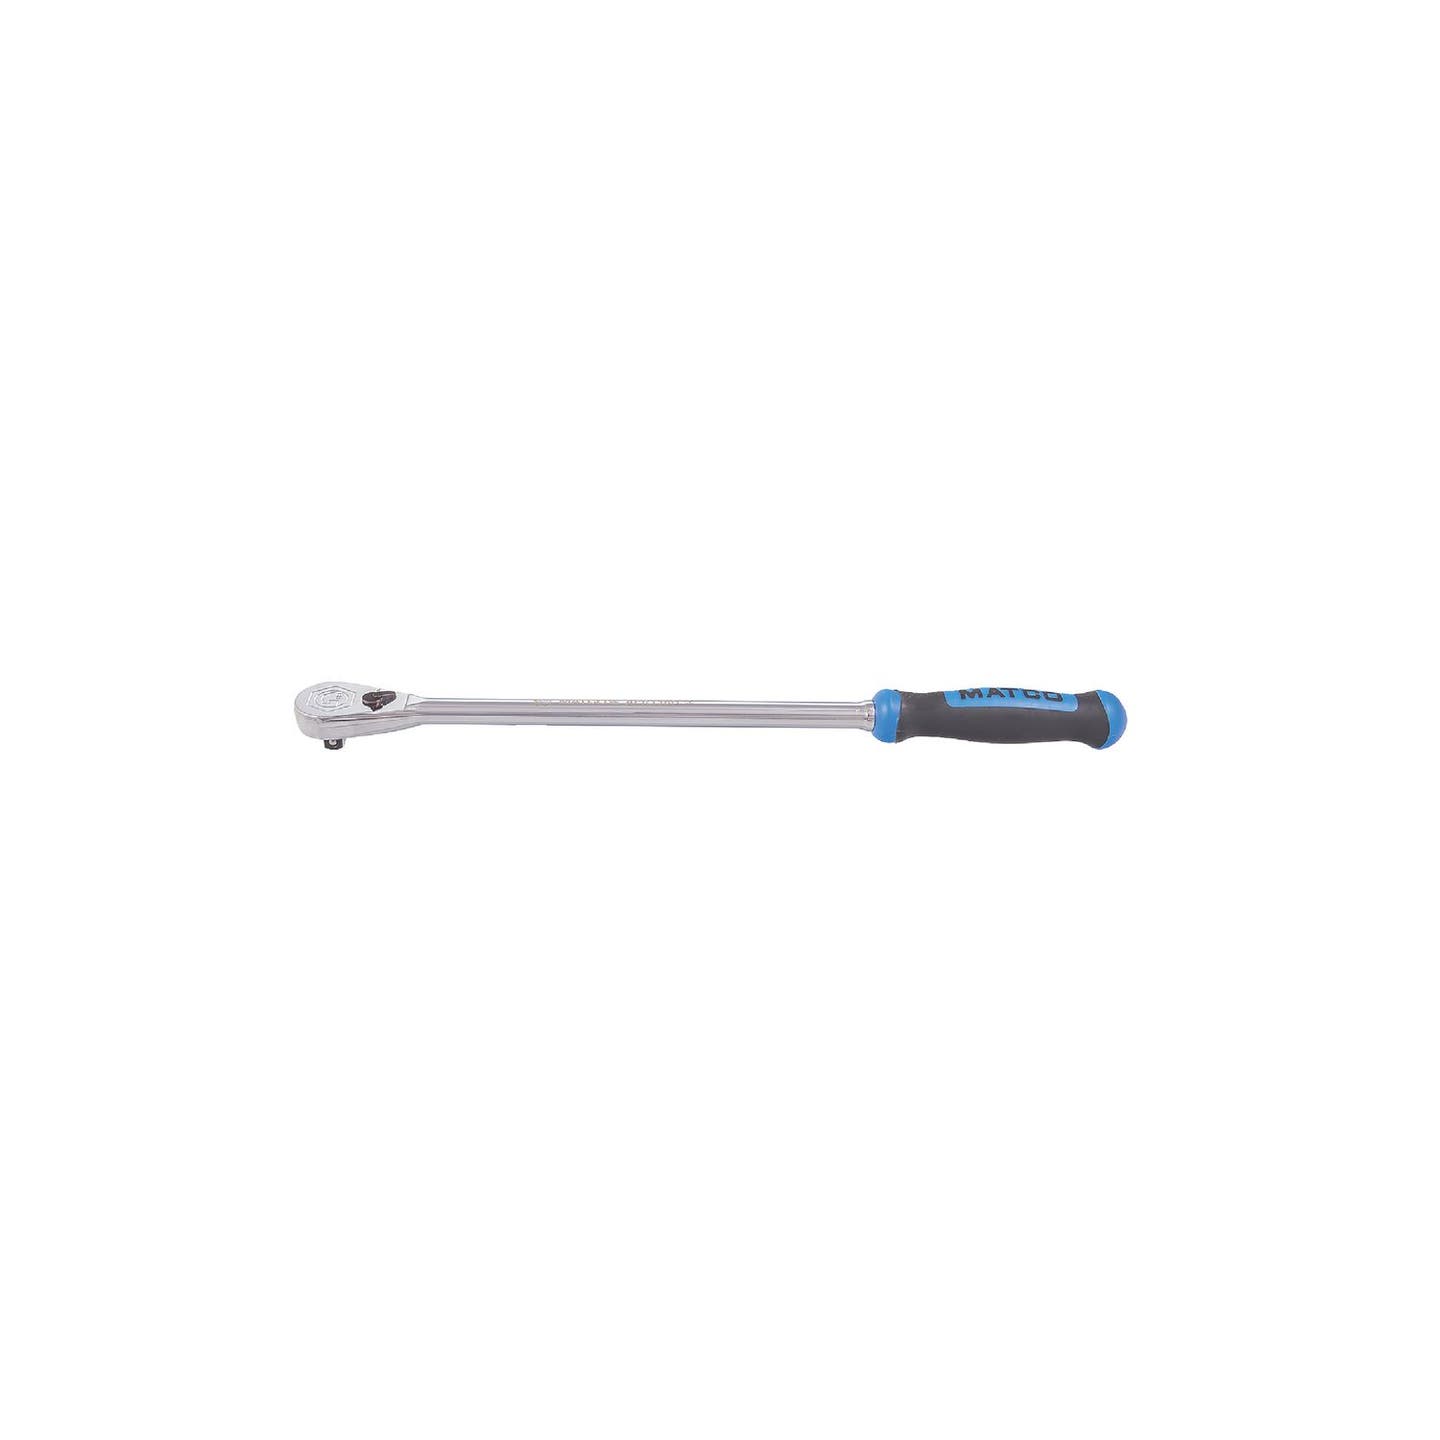 1/4" DRIVE 11-3/4" EIGHTY8 TOOTH FIXED RATCHET WITH ERGO HANDLE - BLUE